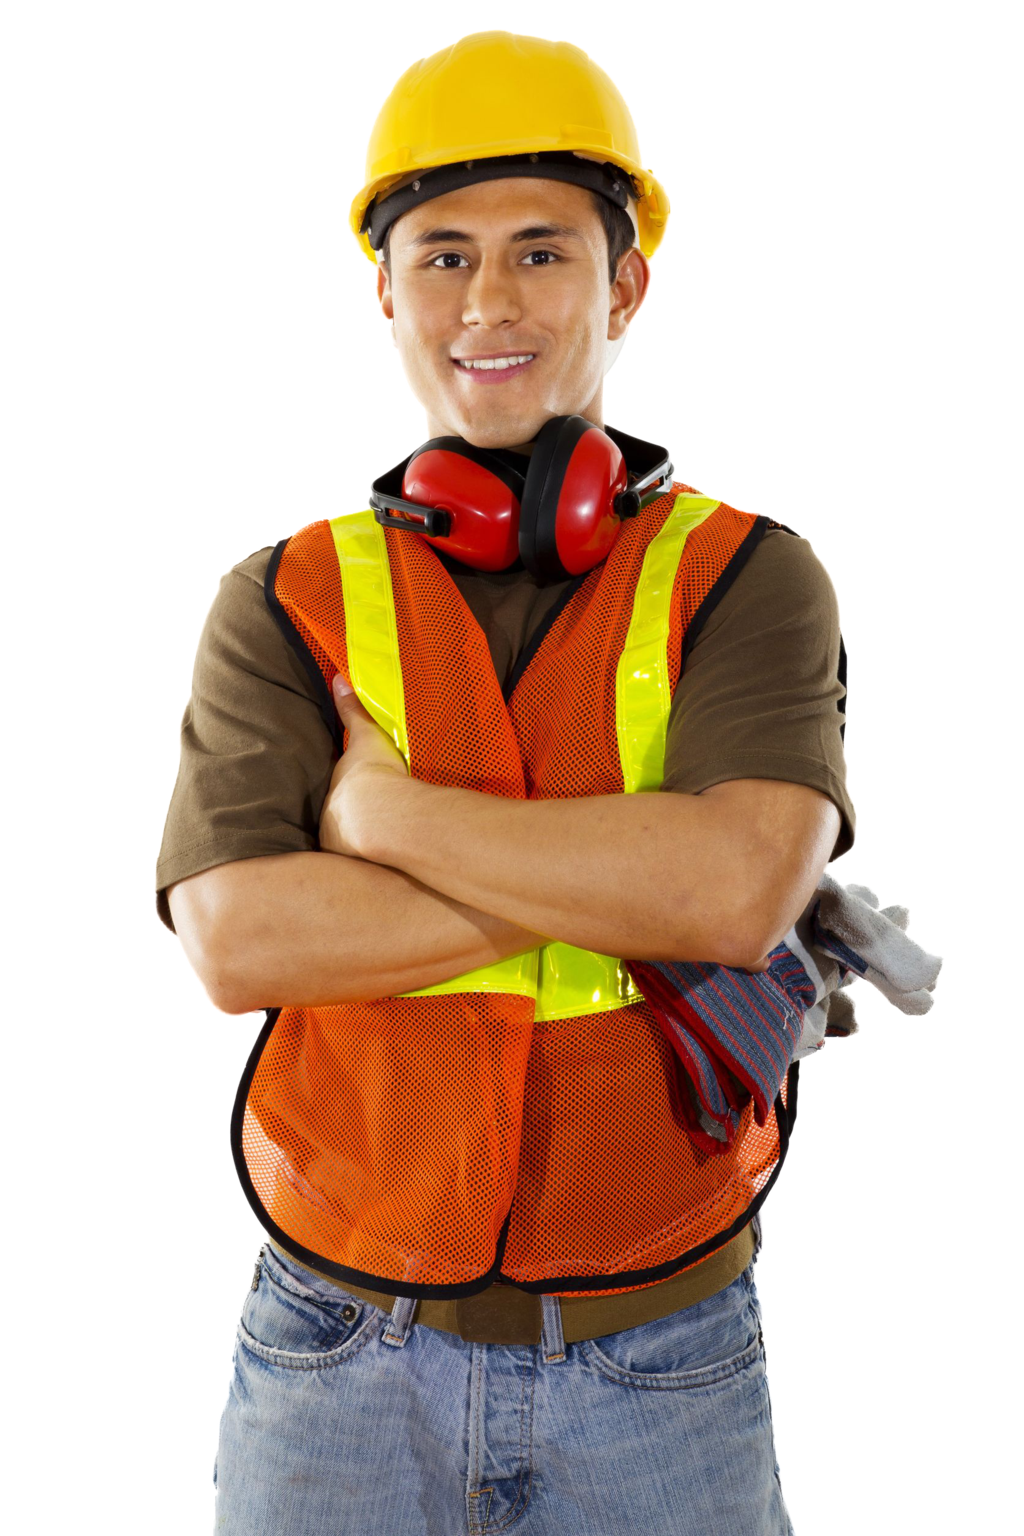 Industrail Worker PNG Image.